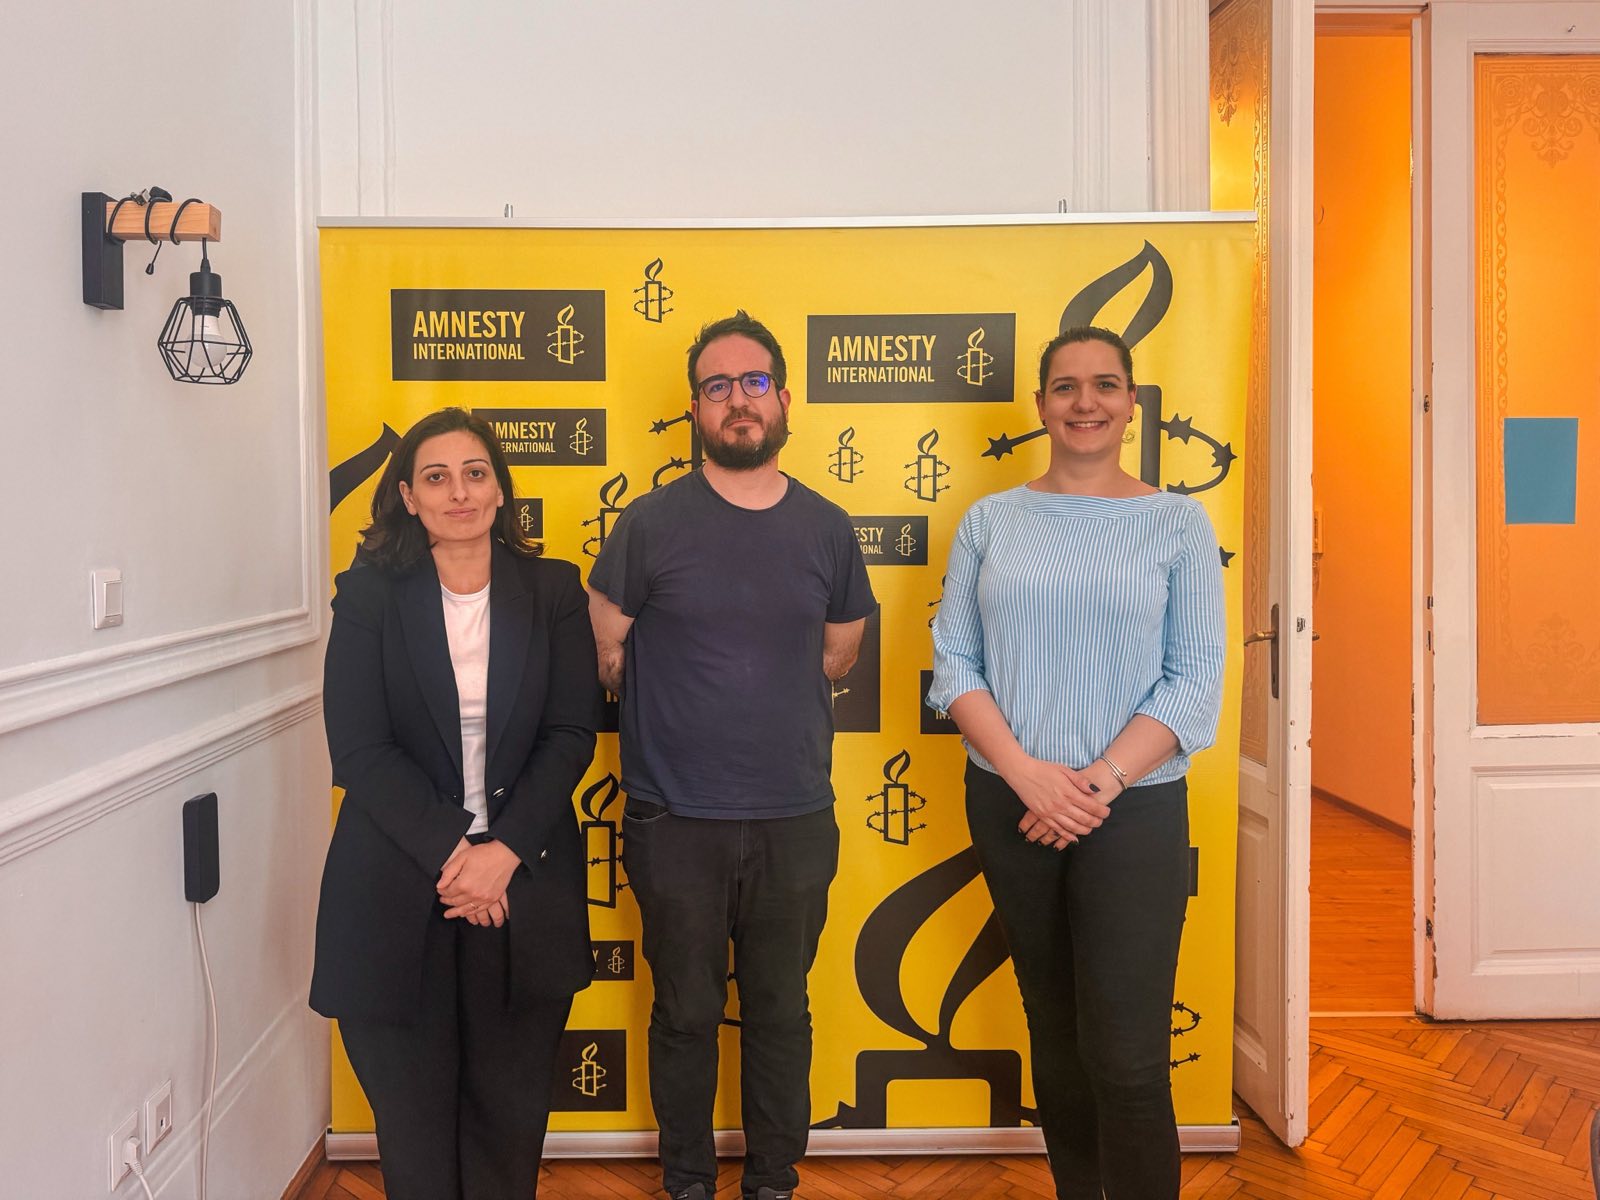 Legal Analyst and Political Analyst of ENEMO’s IEOM to Hungary met with the Head of Research and Communication Department of Amnesty International Hungary